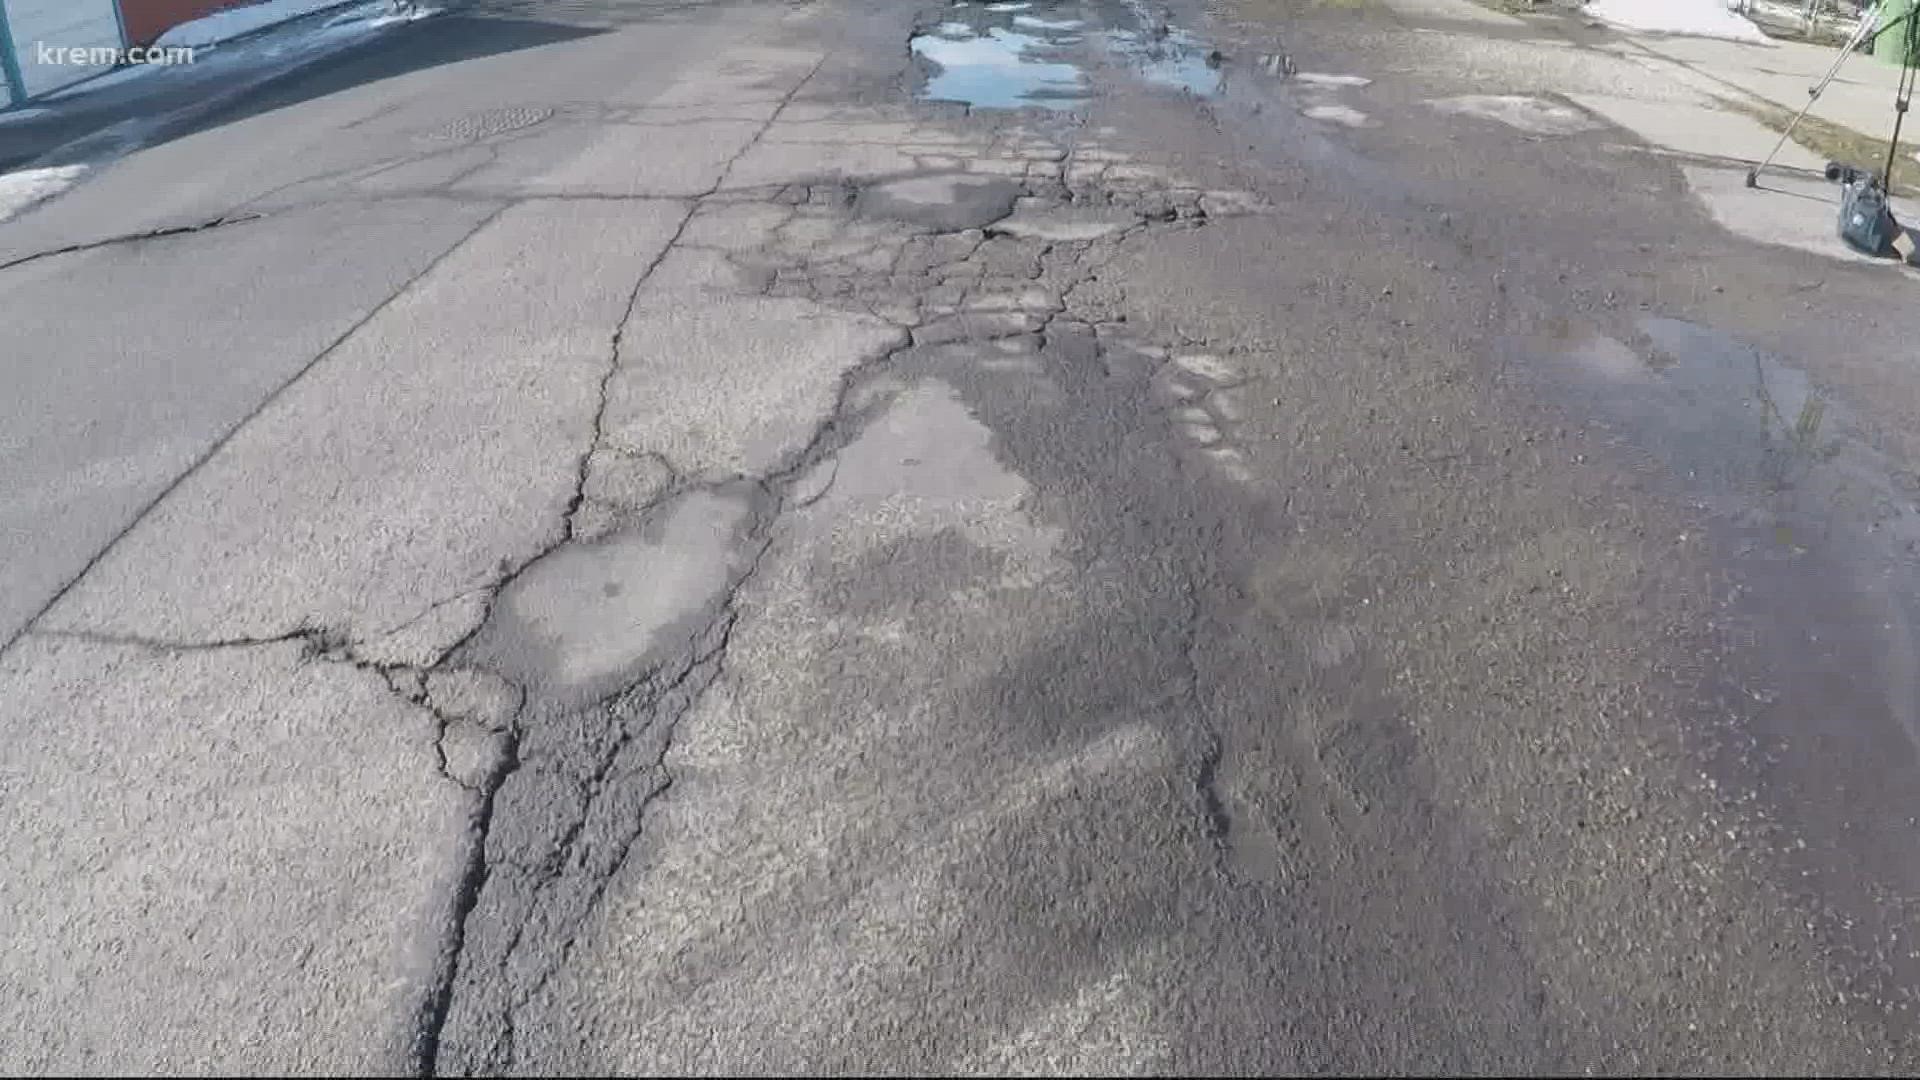 With Spokane’s ongoing freeze-thaw cycle and a booming population putting more wear on the roads, the problem of potholes isn’t going away.